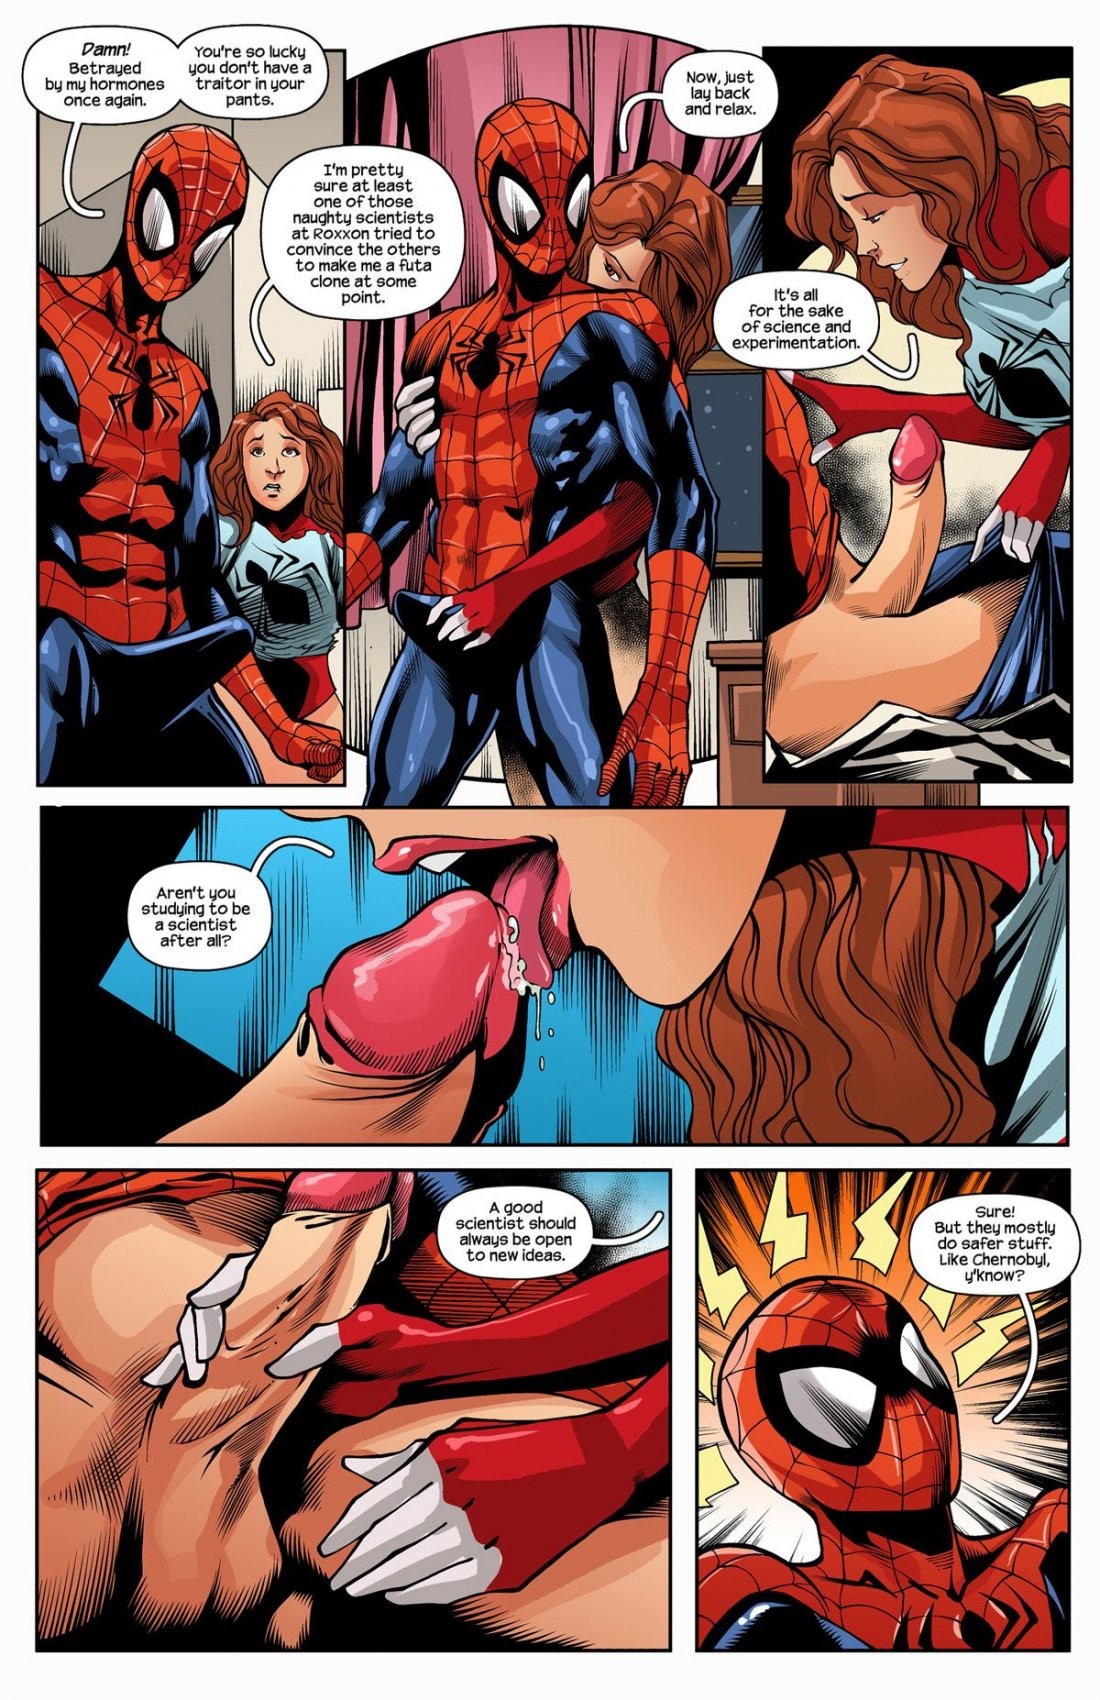 Ultimate Spider-Man XXX 12 - Spidercest - An itsy bitsy spider climbs up porn comic picture 6